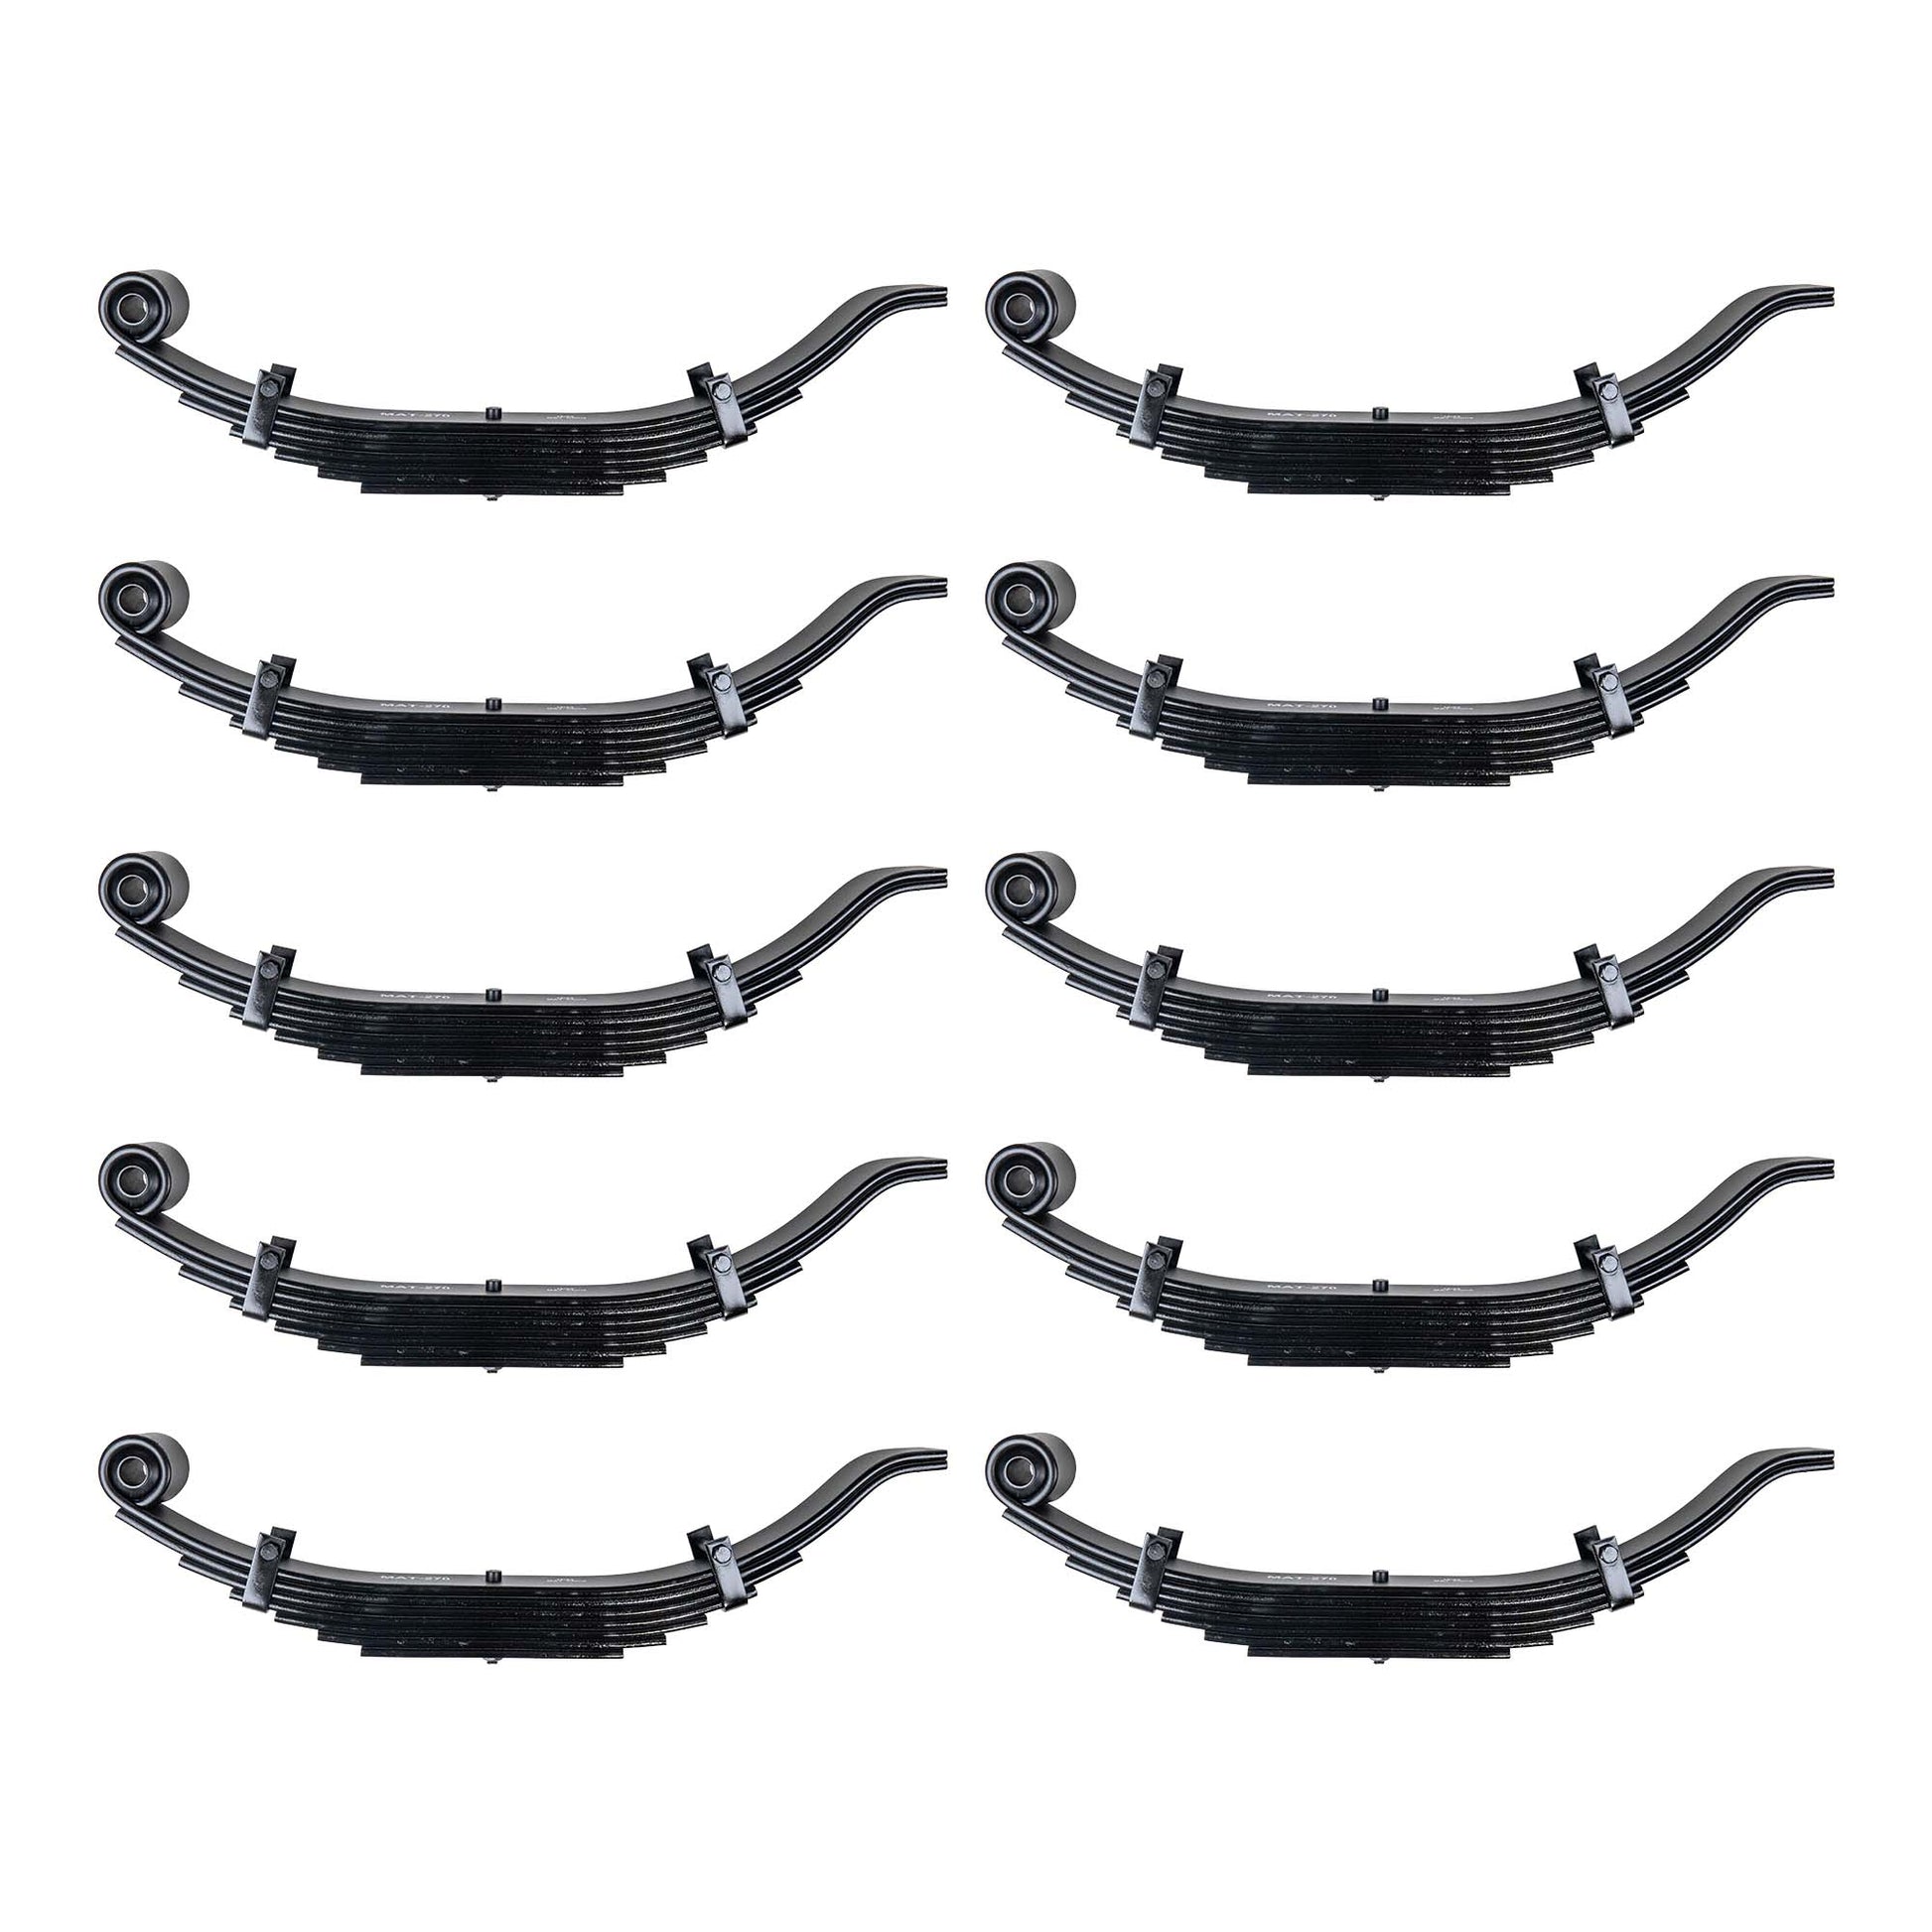 10pack- 7 Leaf 30" x 3" Wide Trailer Heavy Duty Slipper Spring for 15,000 - 16,000 lb Axles